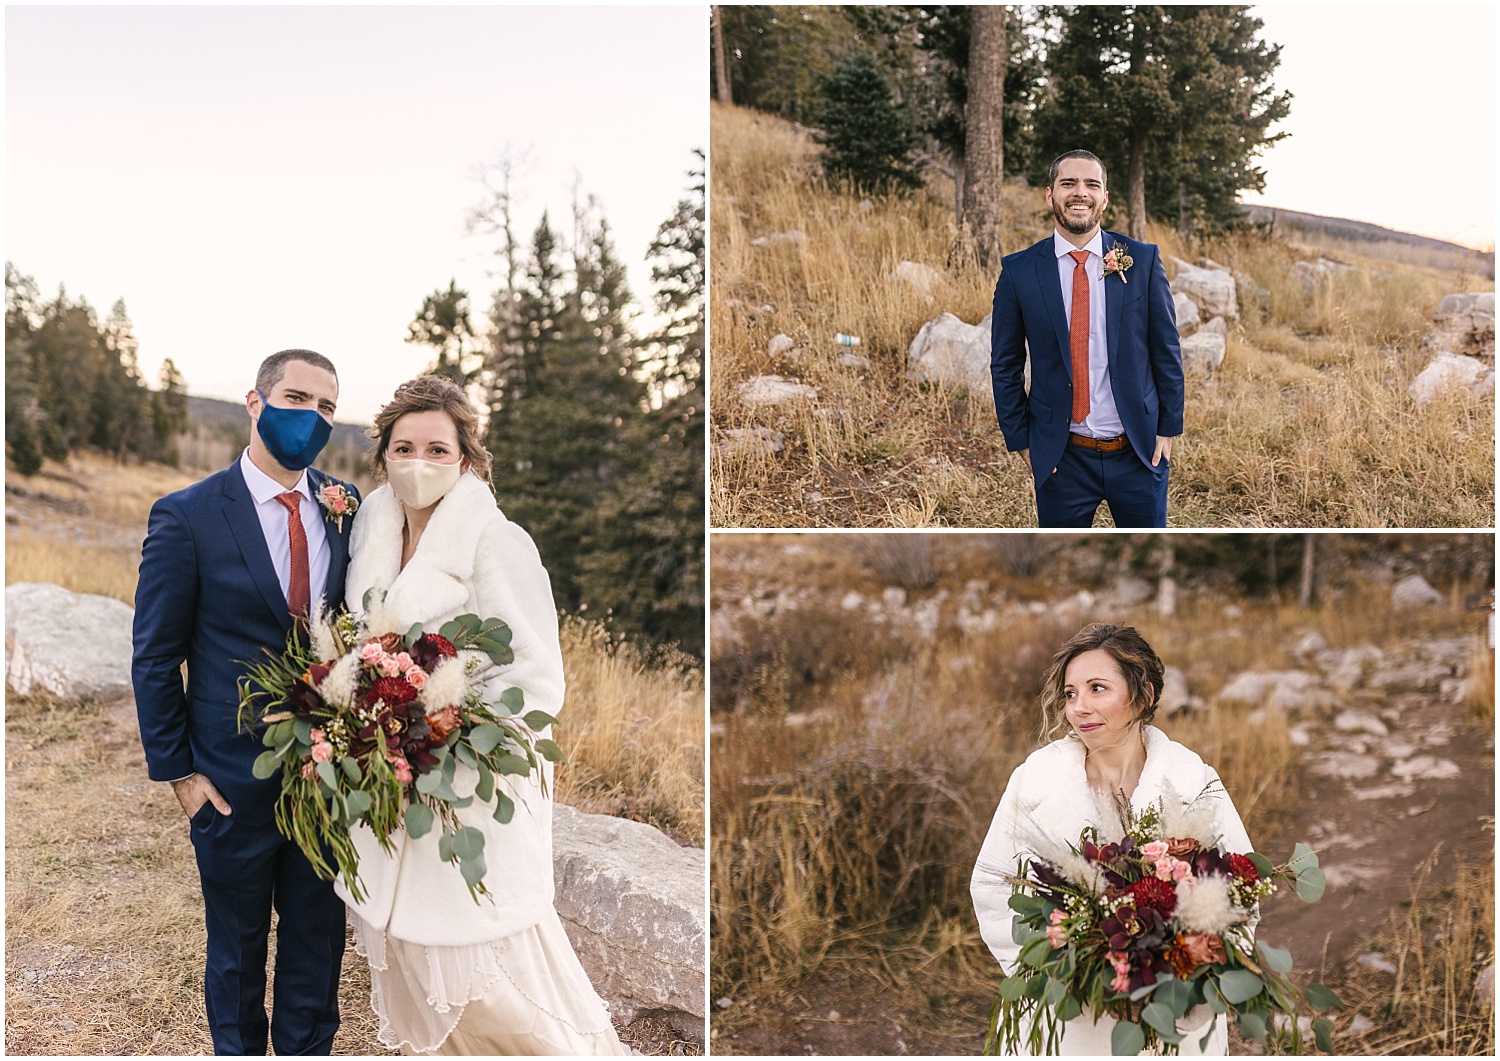 Winter elopement style - white fur coat for bride and navy suit for groom with red details